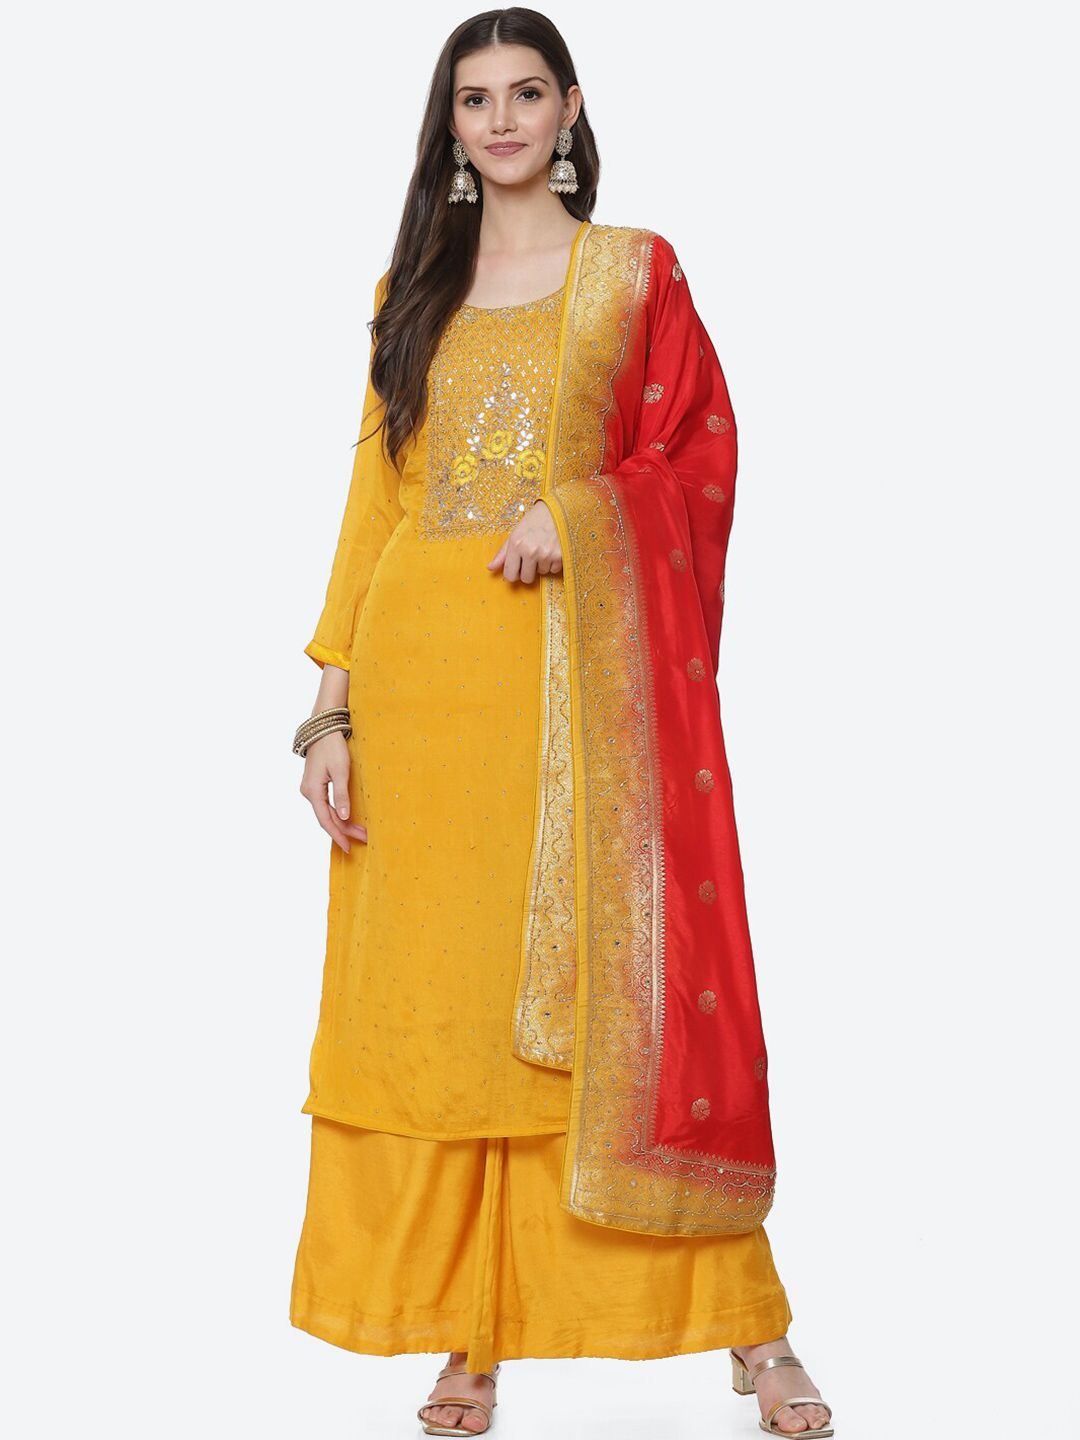 Biba Yellow & Red Embellished Unstitched Dress Material Price in India